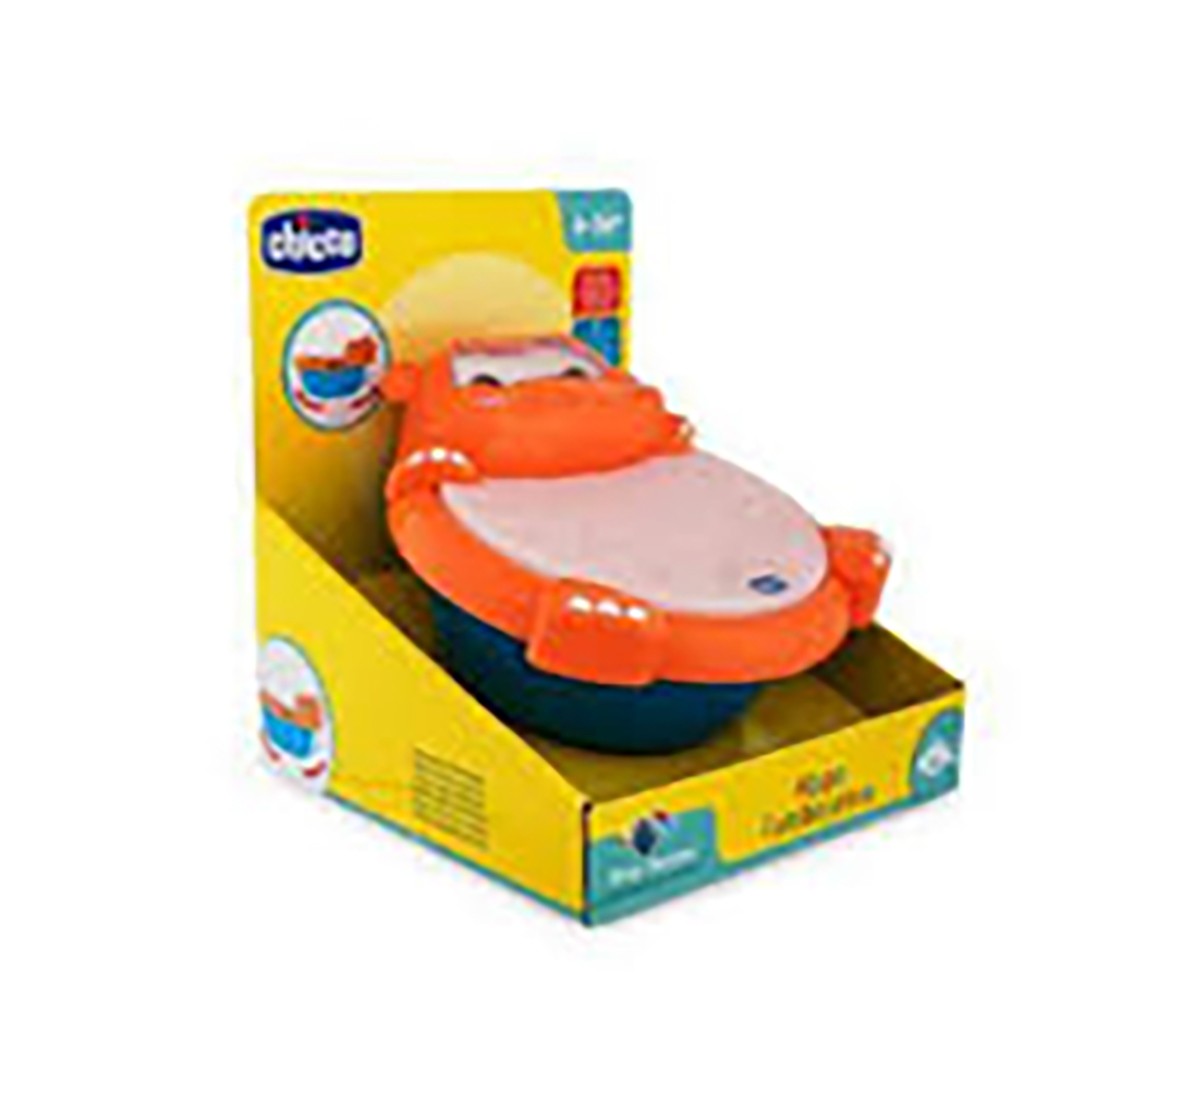 Chicco Hippo Tambourine Drum Musical Toy with Light for Kids age 6M+ (Orange)